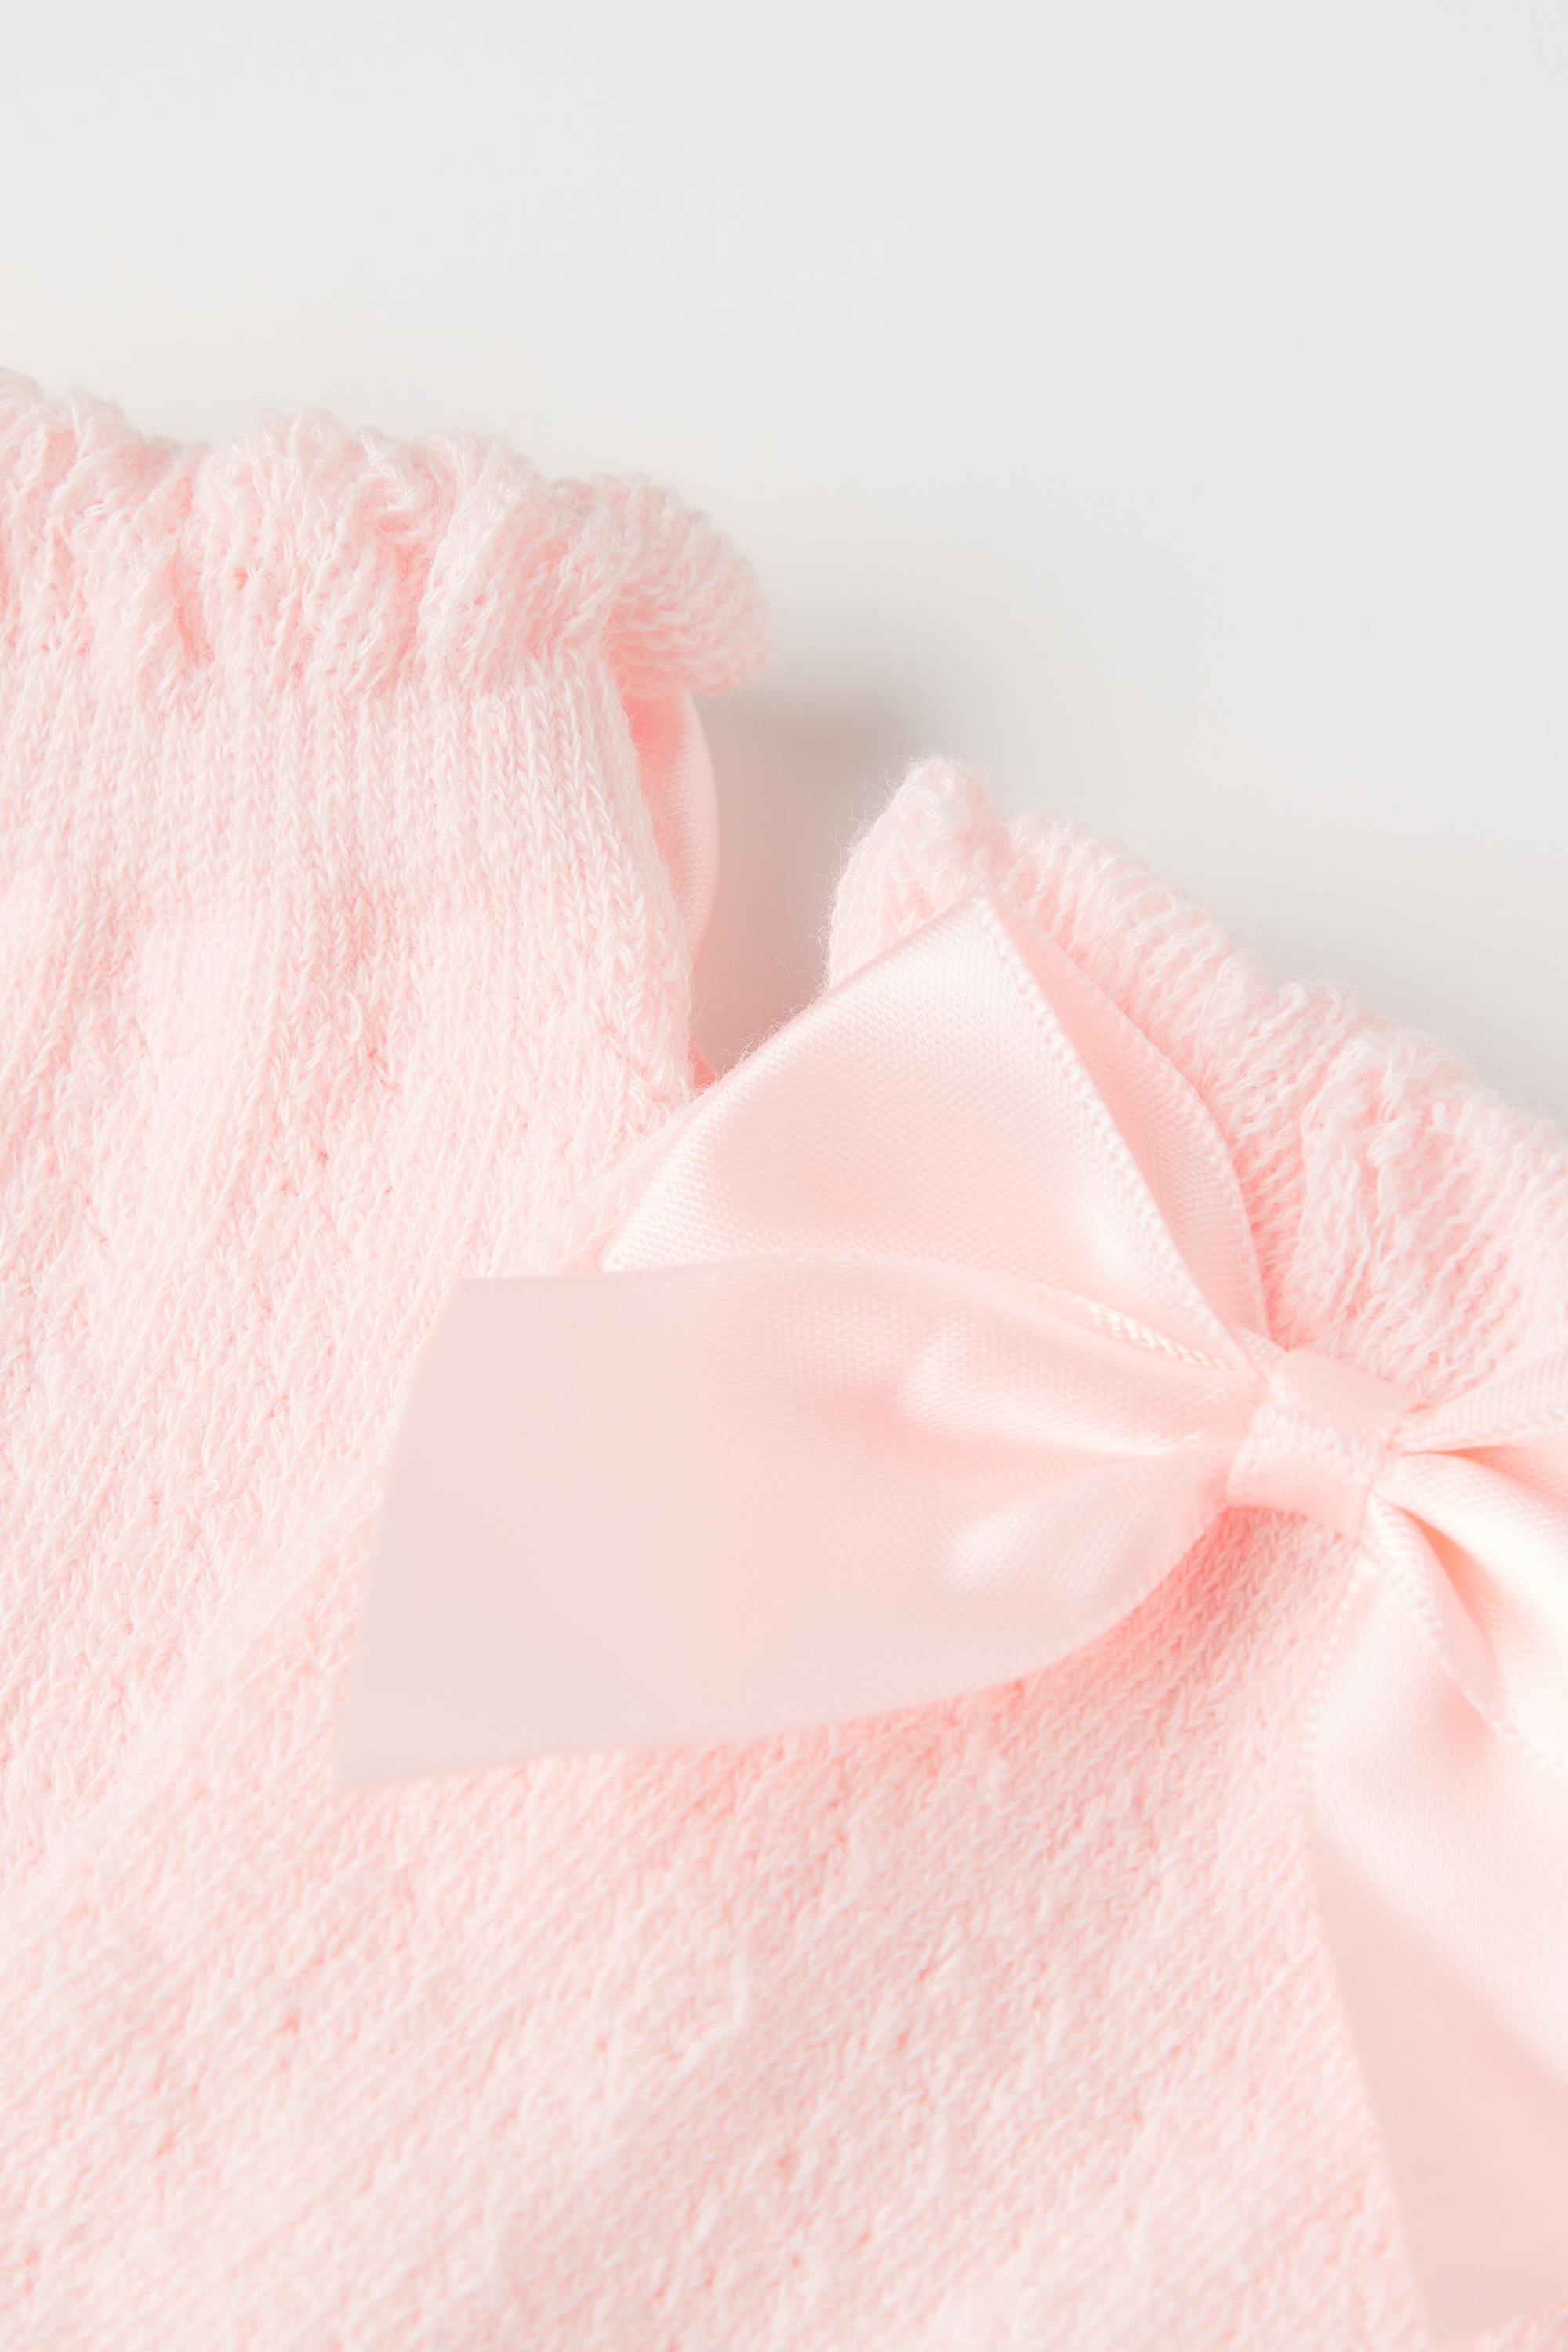 Girls’ Short Worked Cotton Socks with Satin Bow